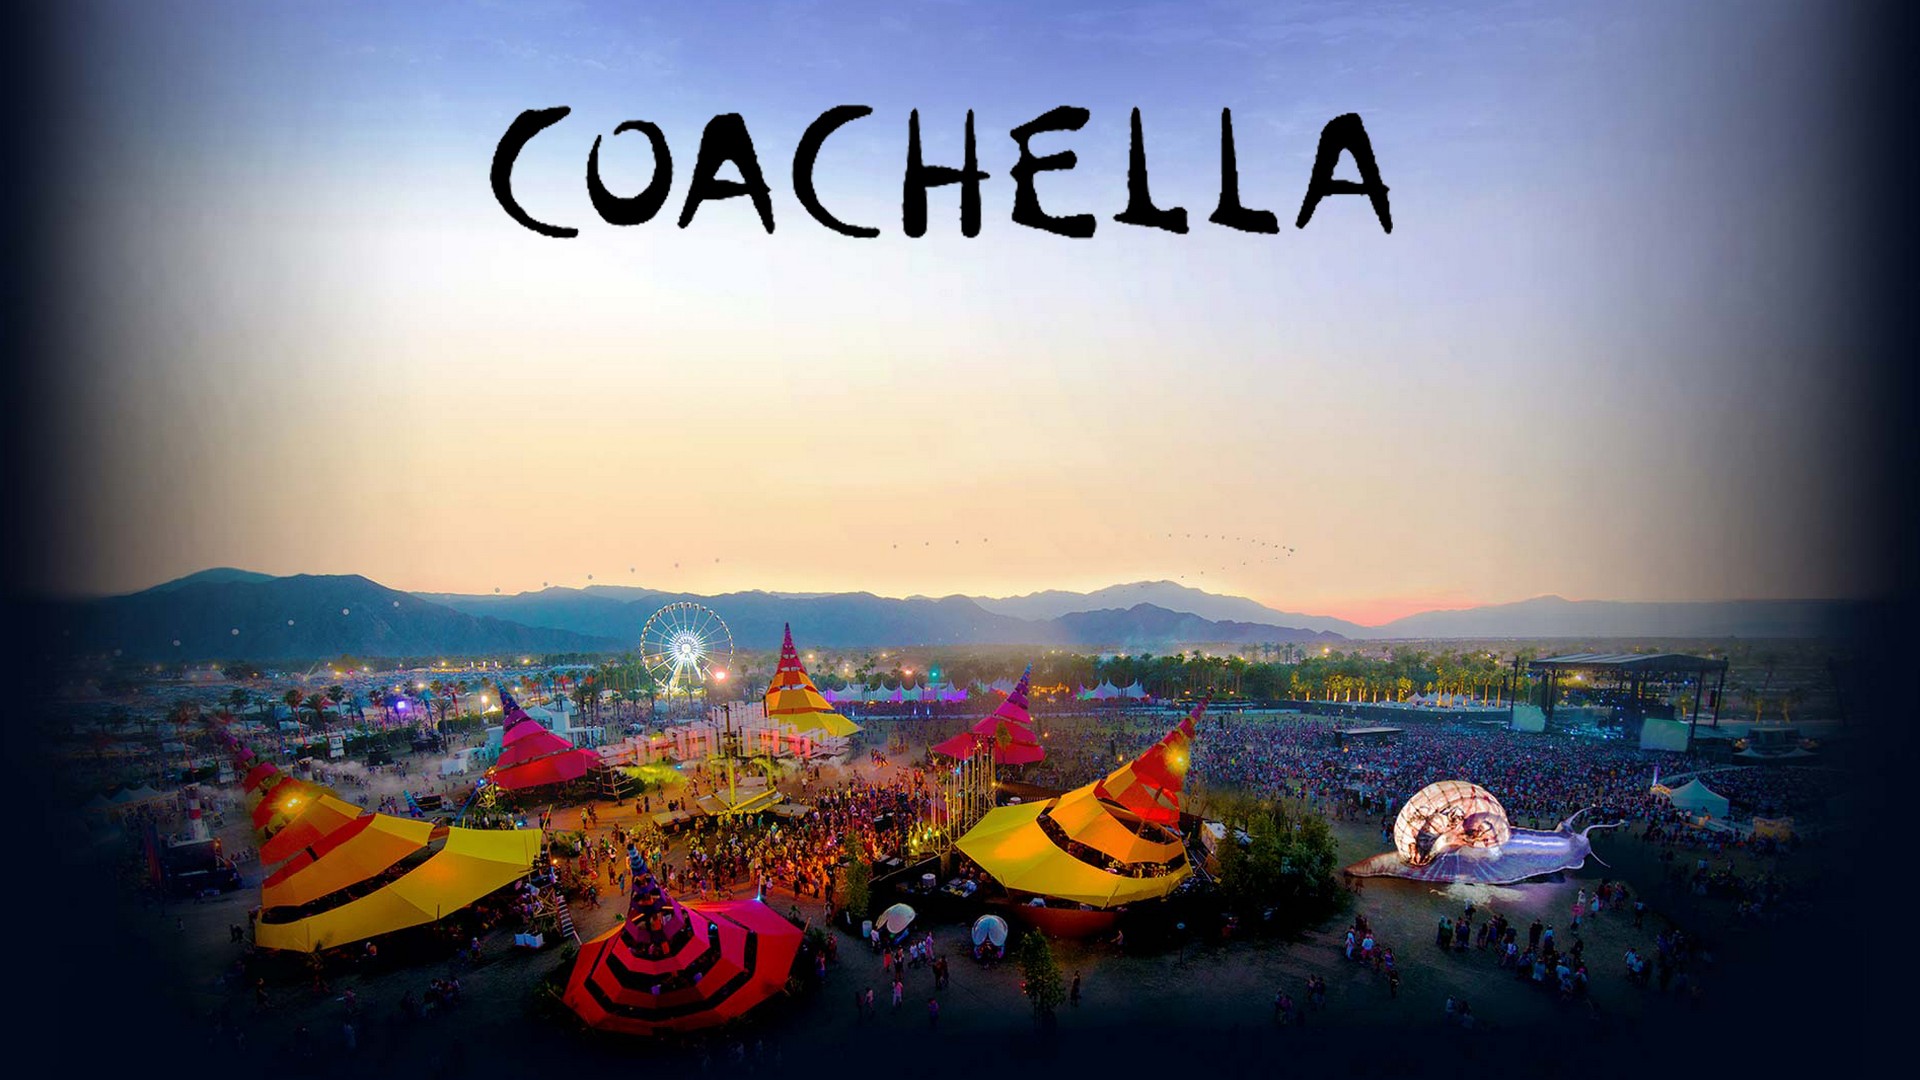 Wallpaper Coachella 2019 HD With high-resolution 1920X1080 pixel. You can use this wallpaper for your Desktop Computer Backgrounds, Mac Wallpapers, Android Lock screen or iPhone Screensavers and another smartphone device